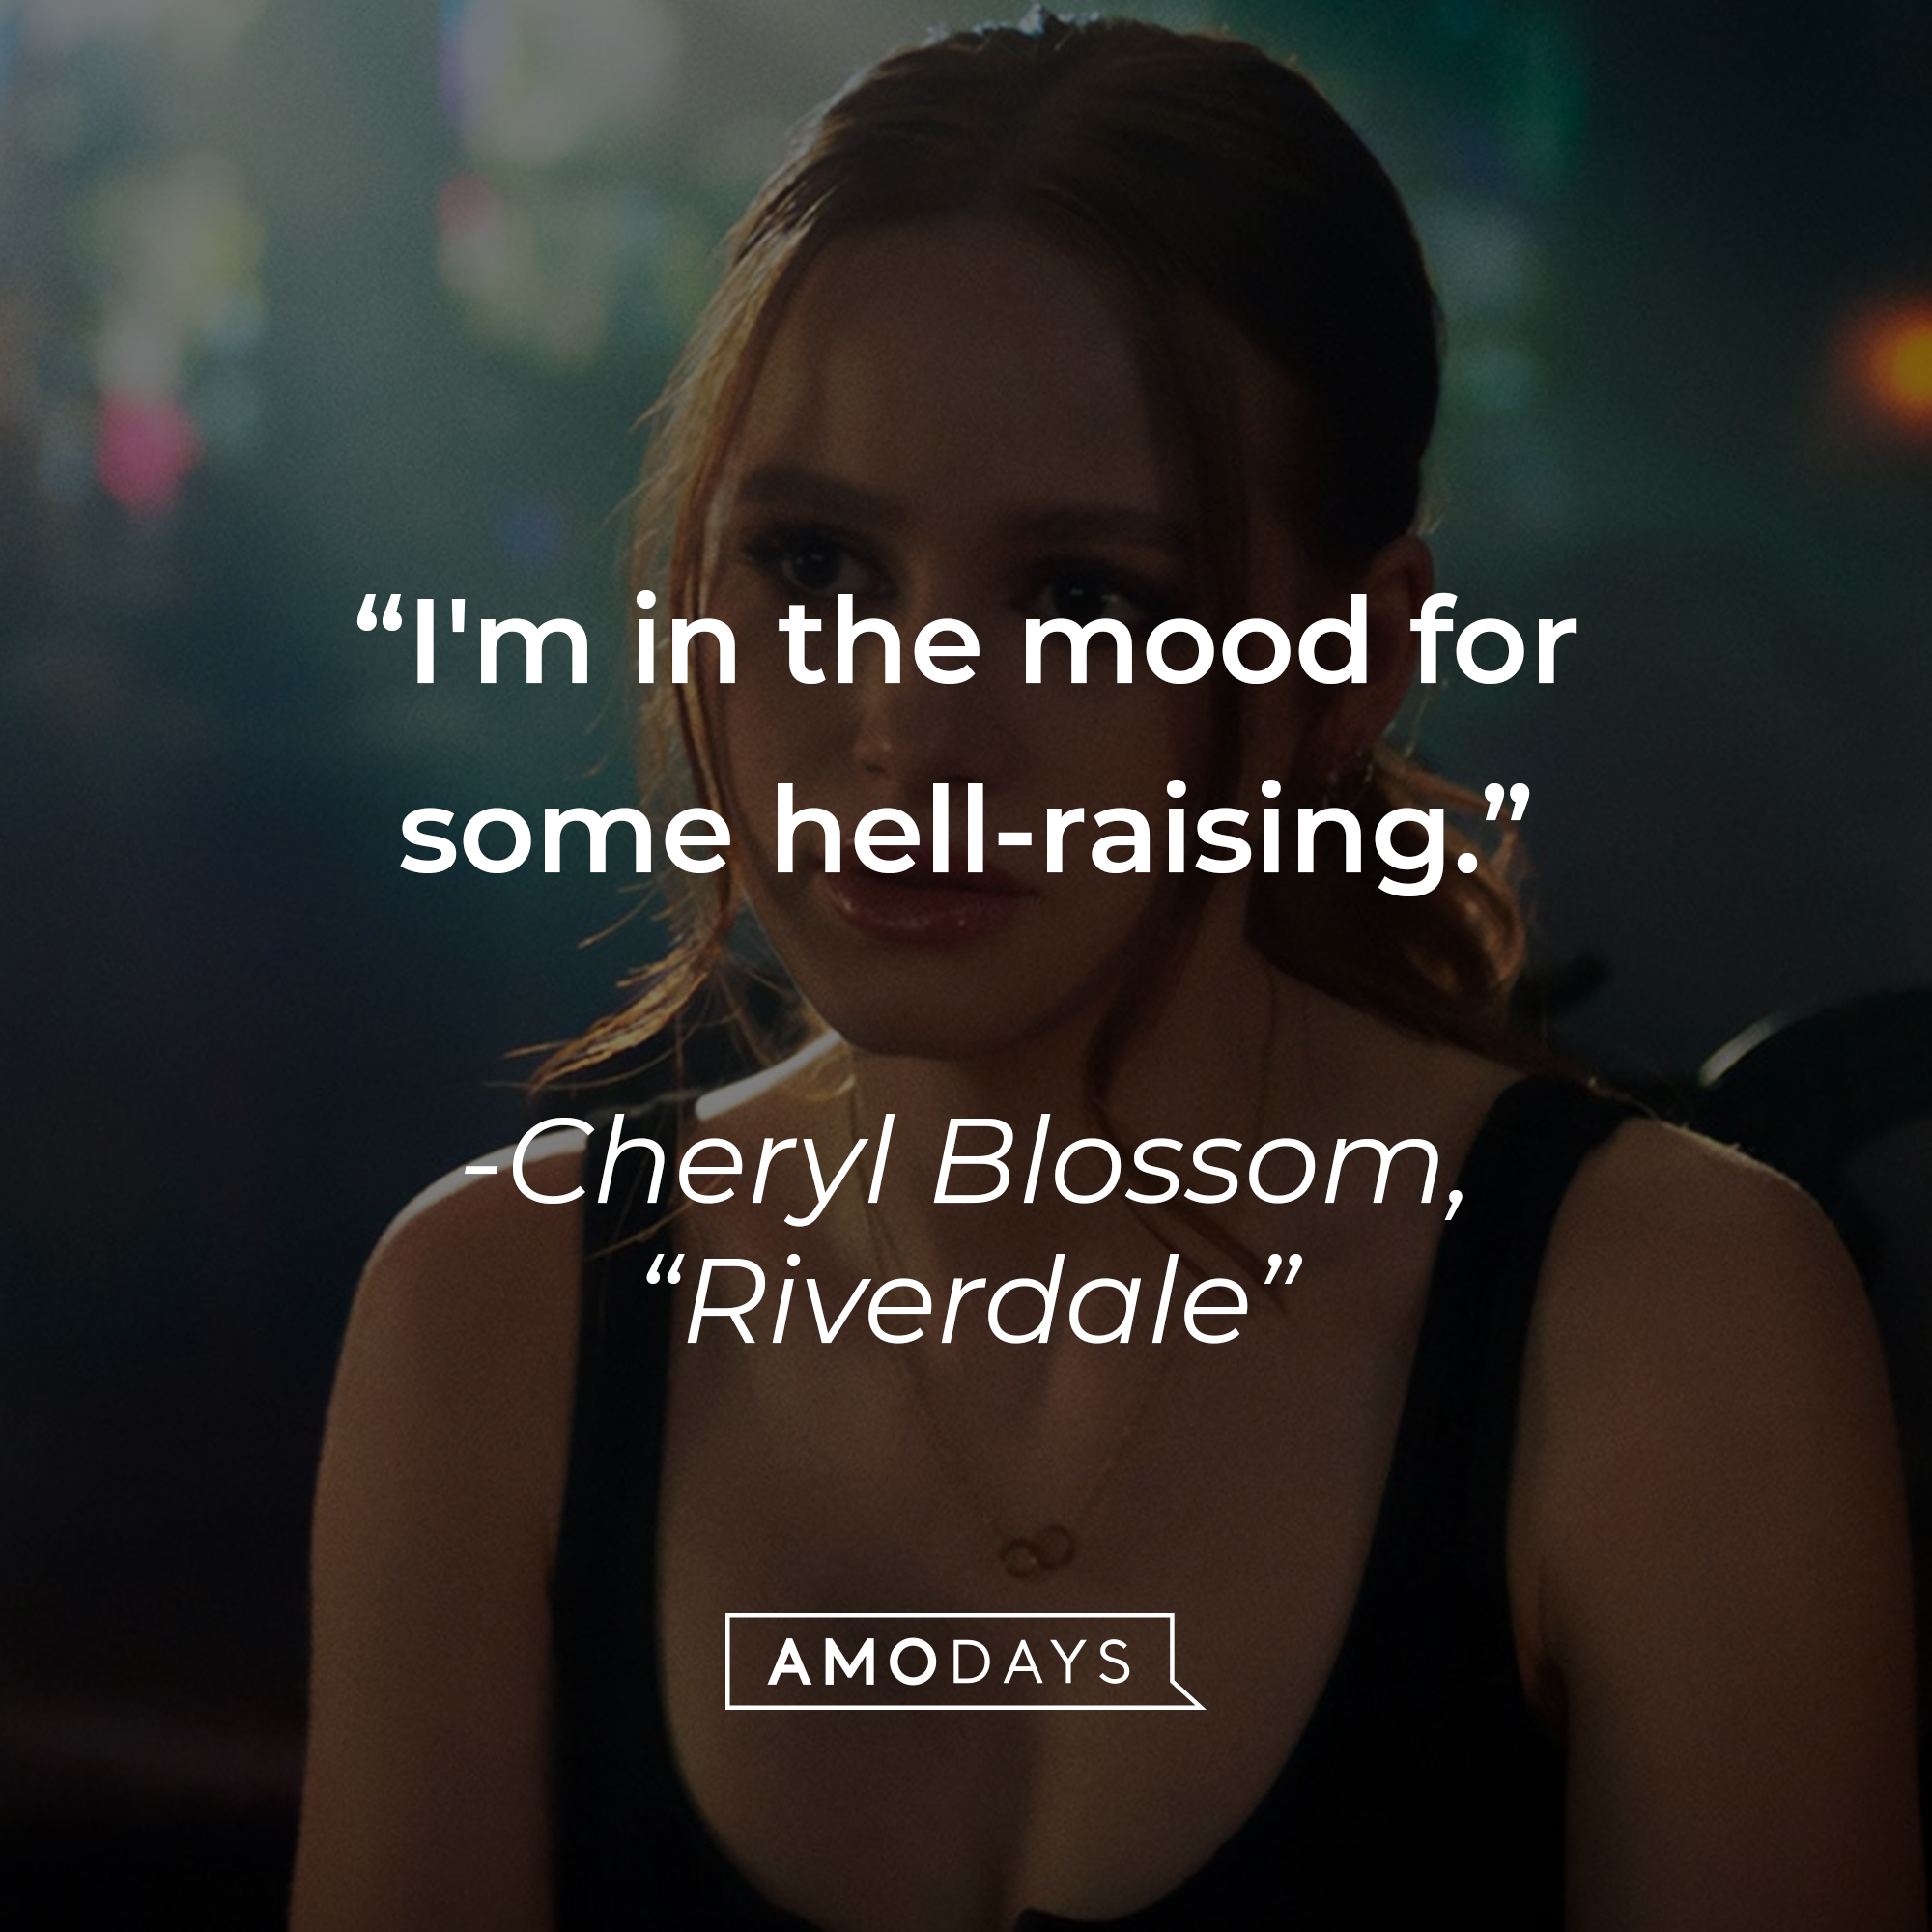 Cheryl Blossom with her quote: "I'm in the mood for some hell-raising." | Source: Facebook.com/CWRiverdale